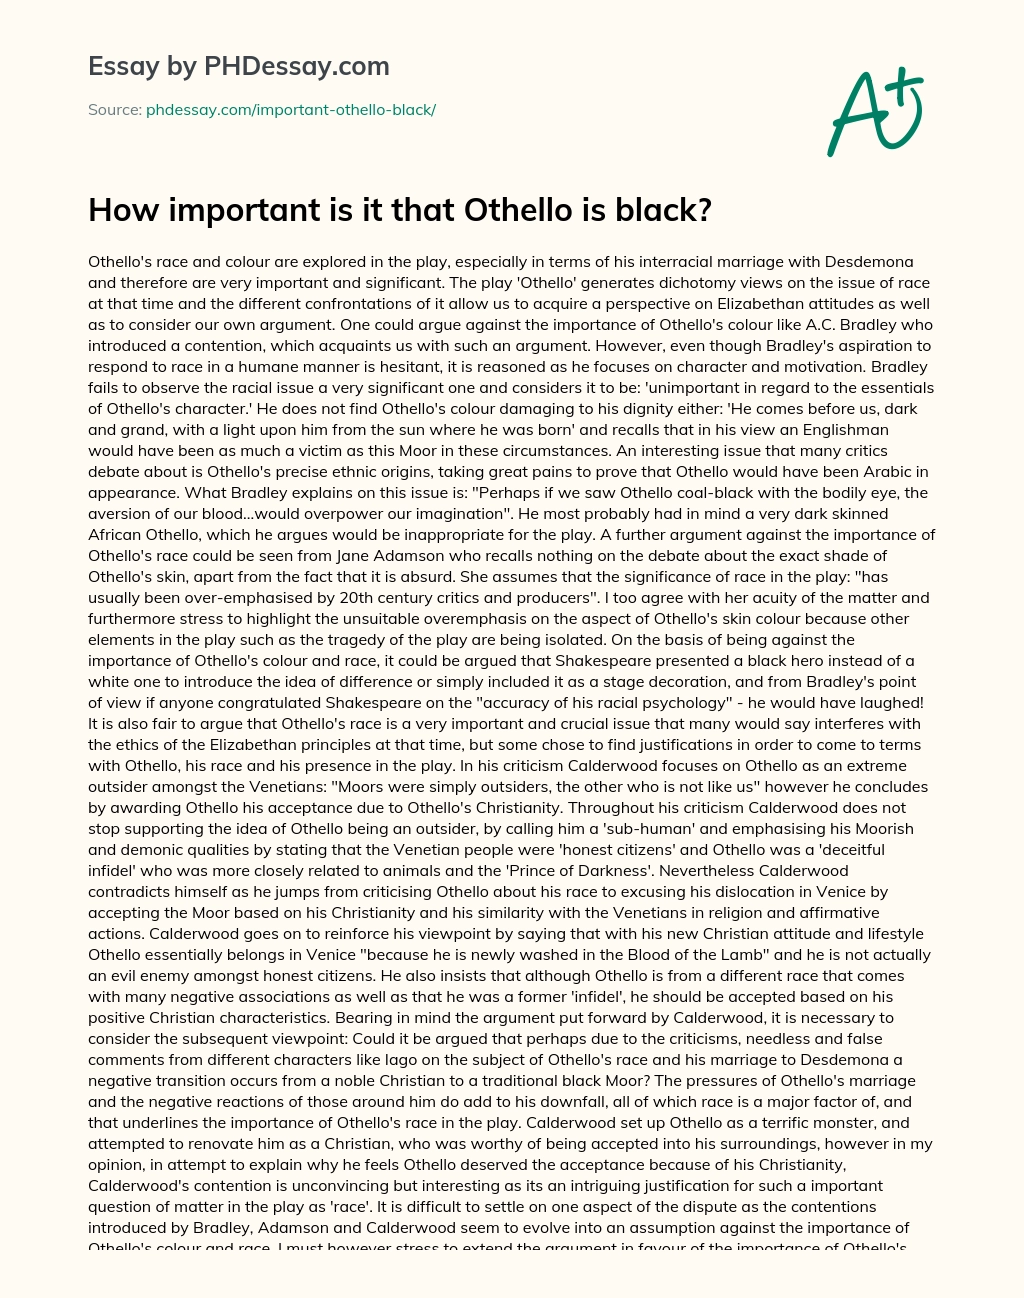 How important is it that Othello is black? essay